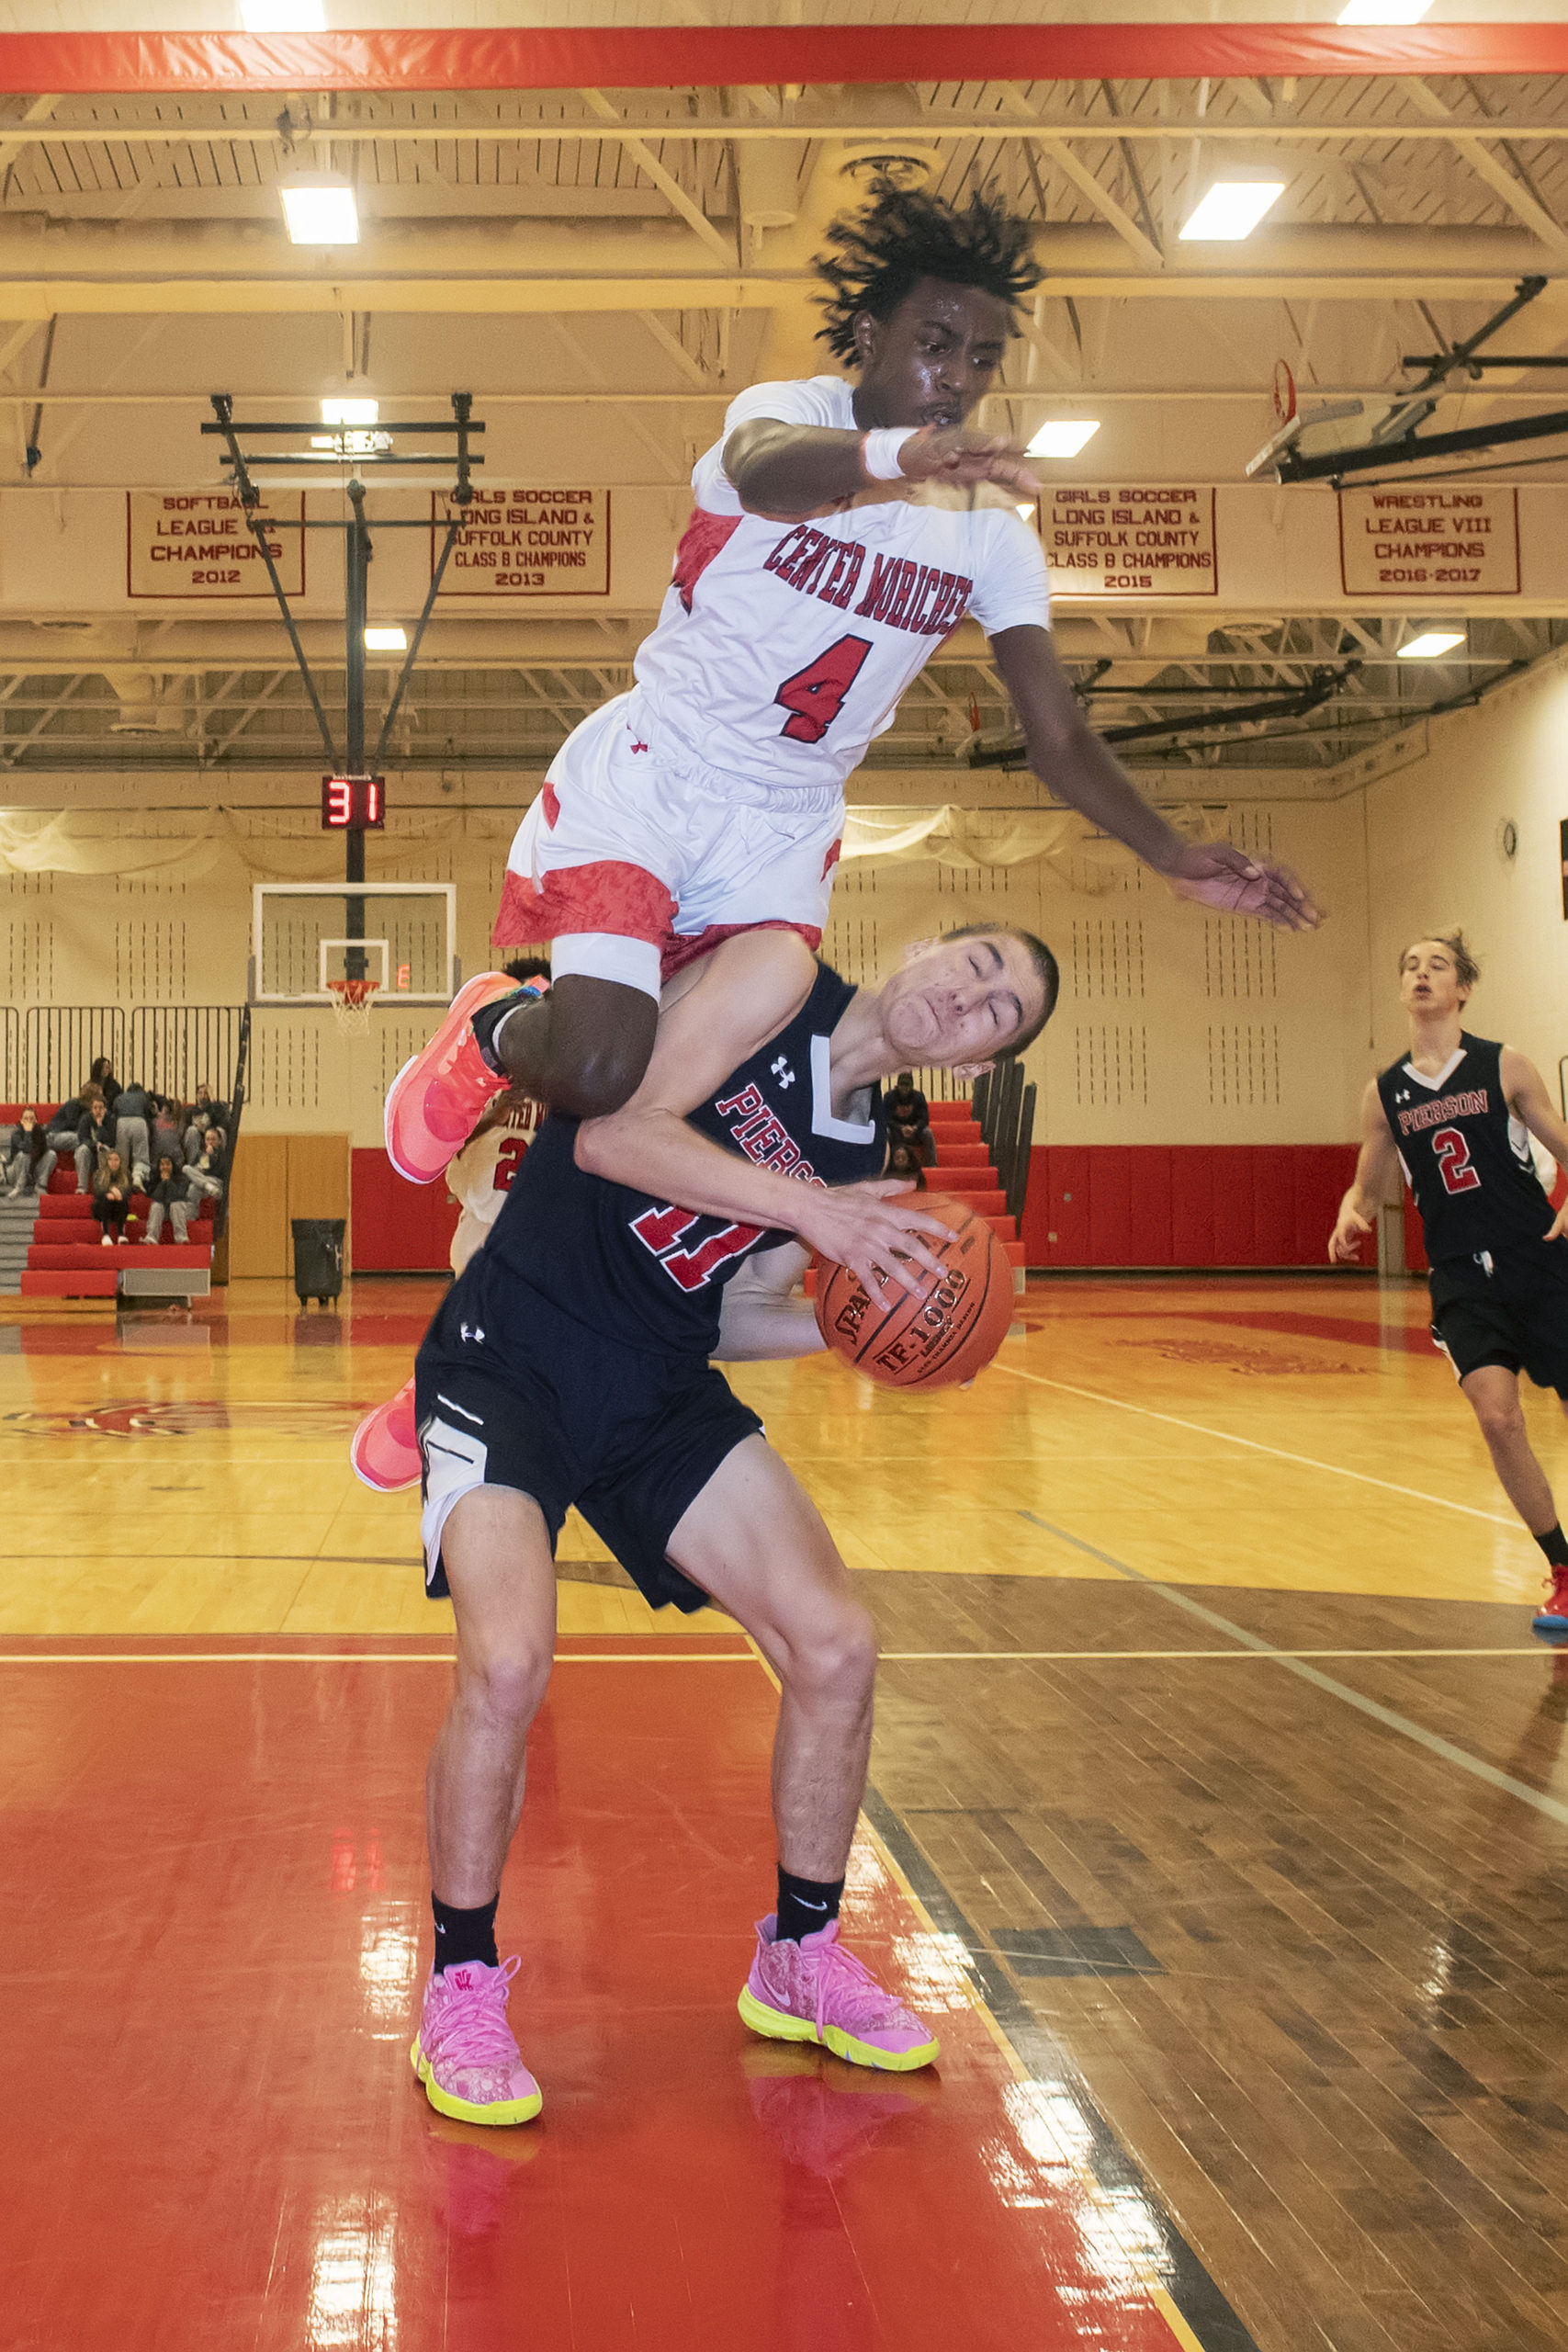 Pierson's Nick Egbert draws Dayrien Franklin of Center Moriches to leap.